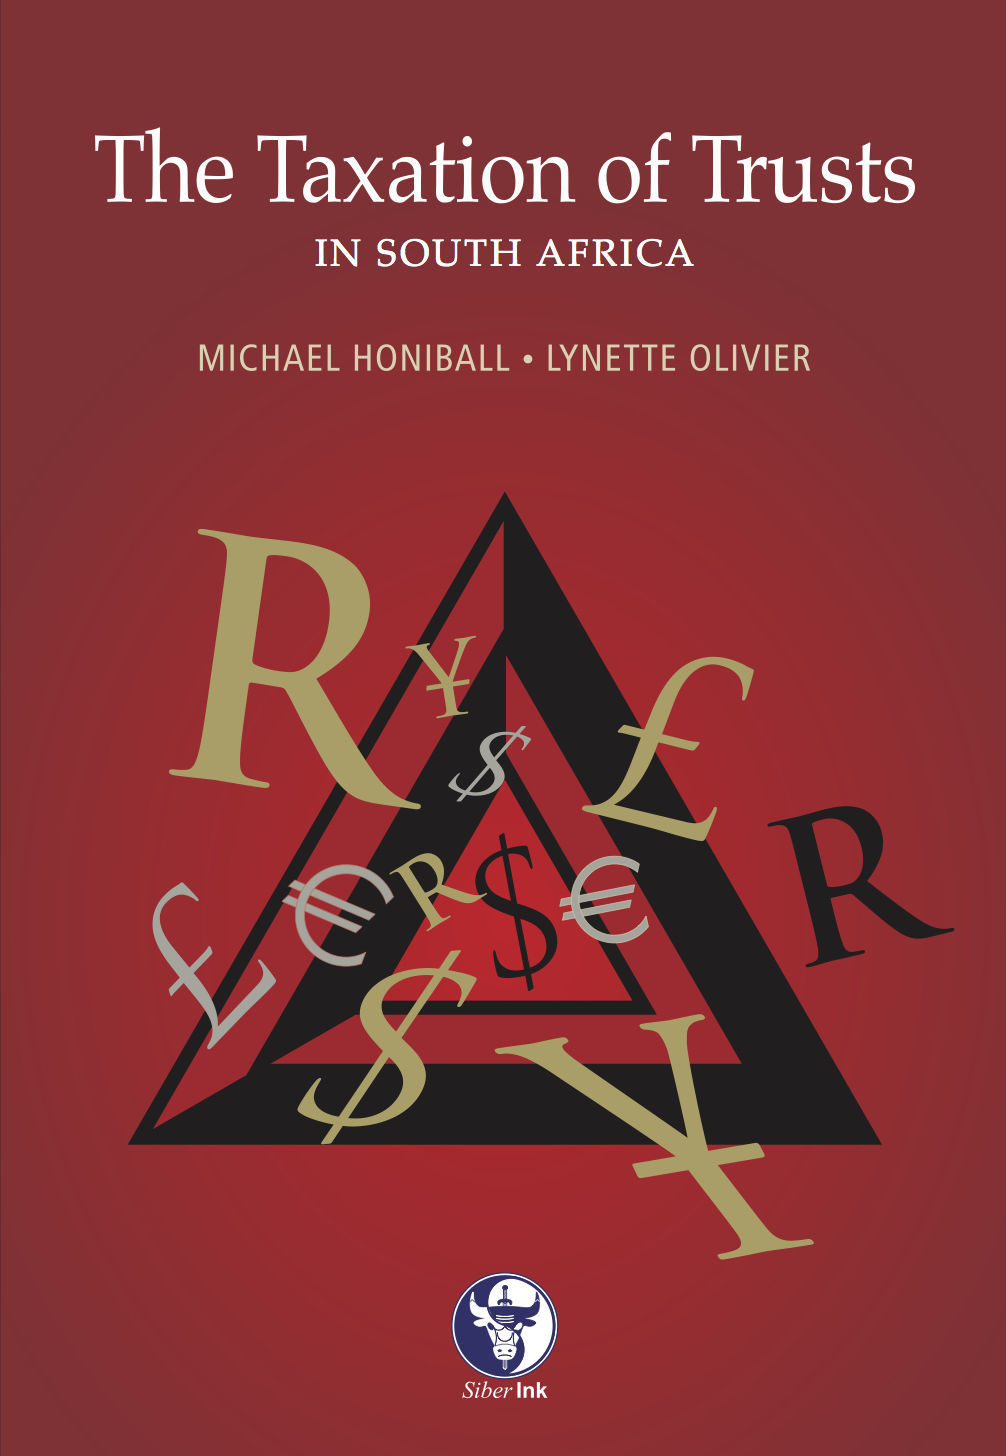 Taxation of Trusts in South Africa, The